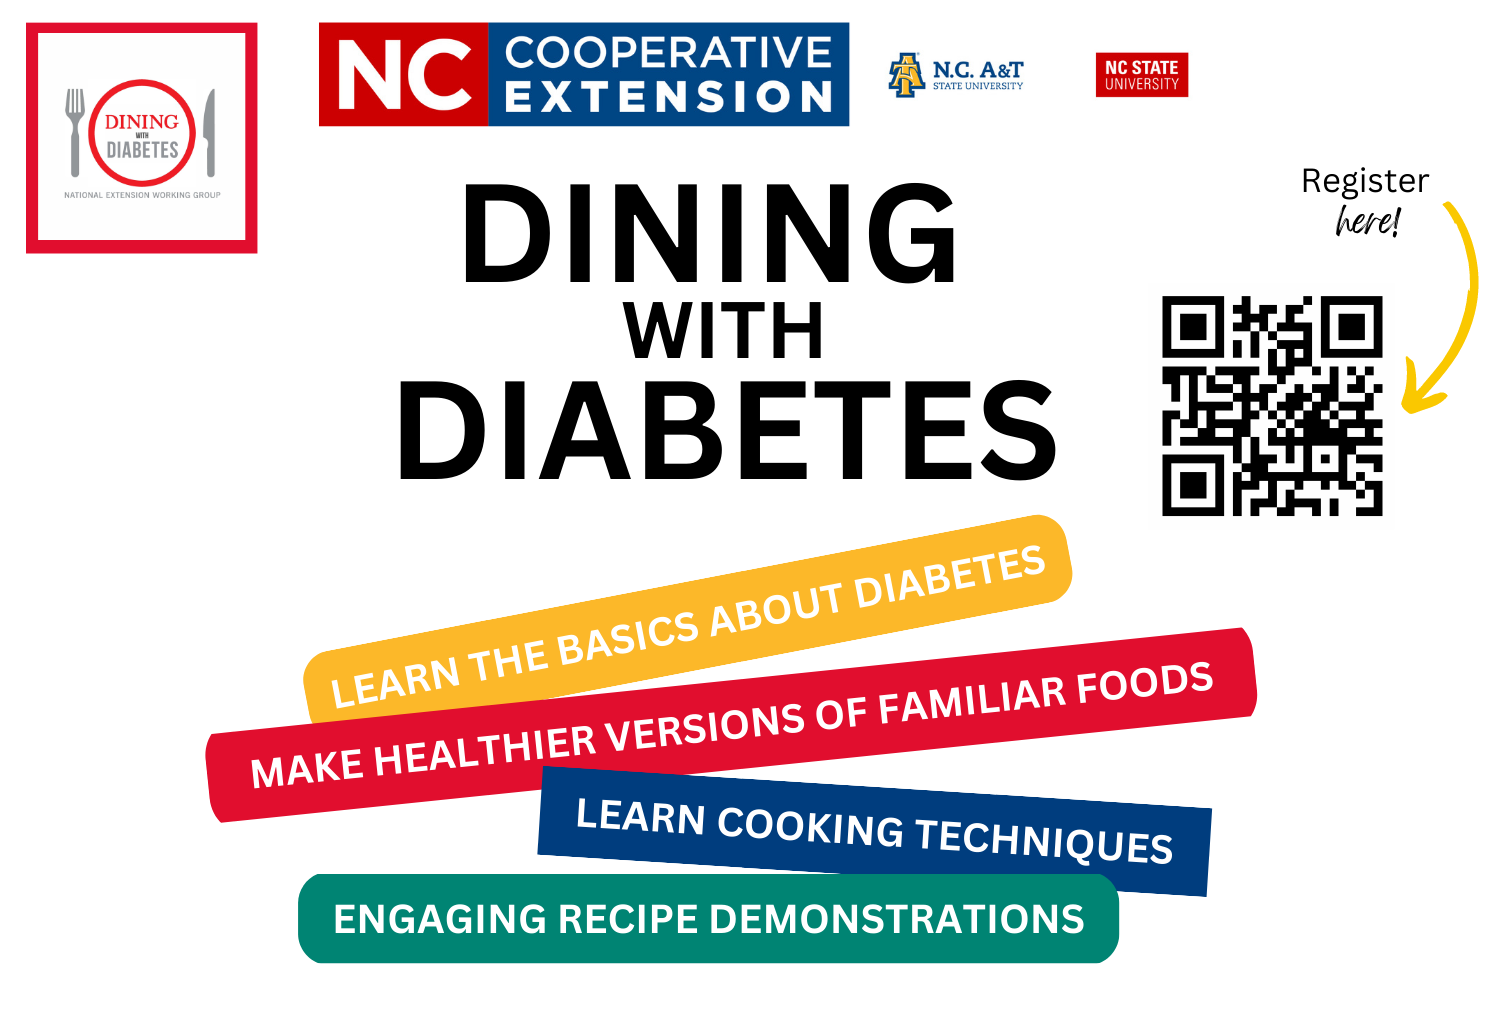 Dining with Diabetes logo